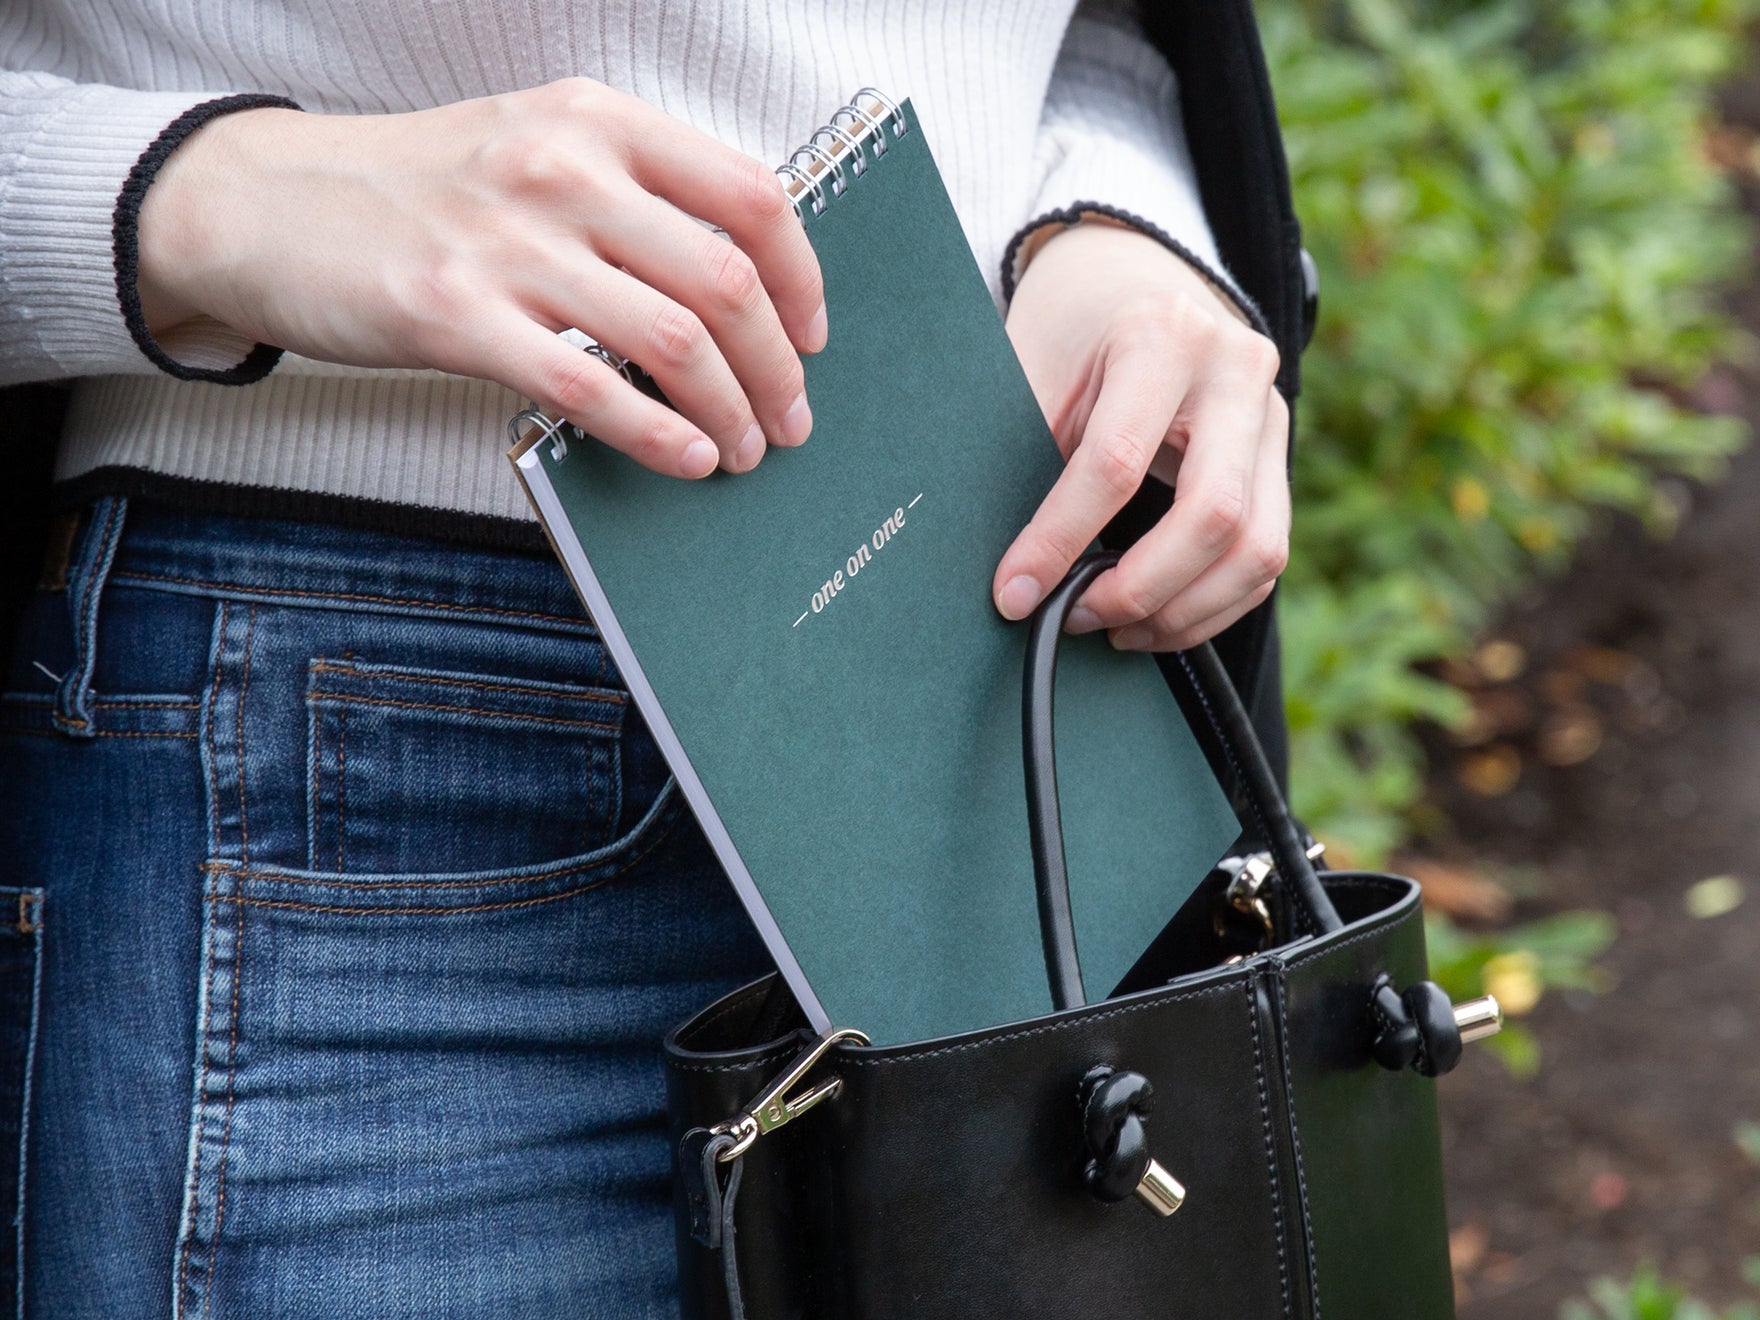 A woman puts a green one-on-one notepad into a black handbag